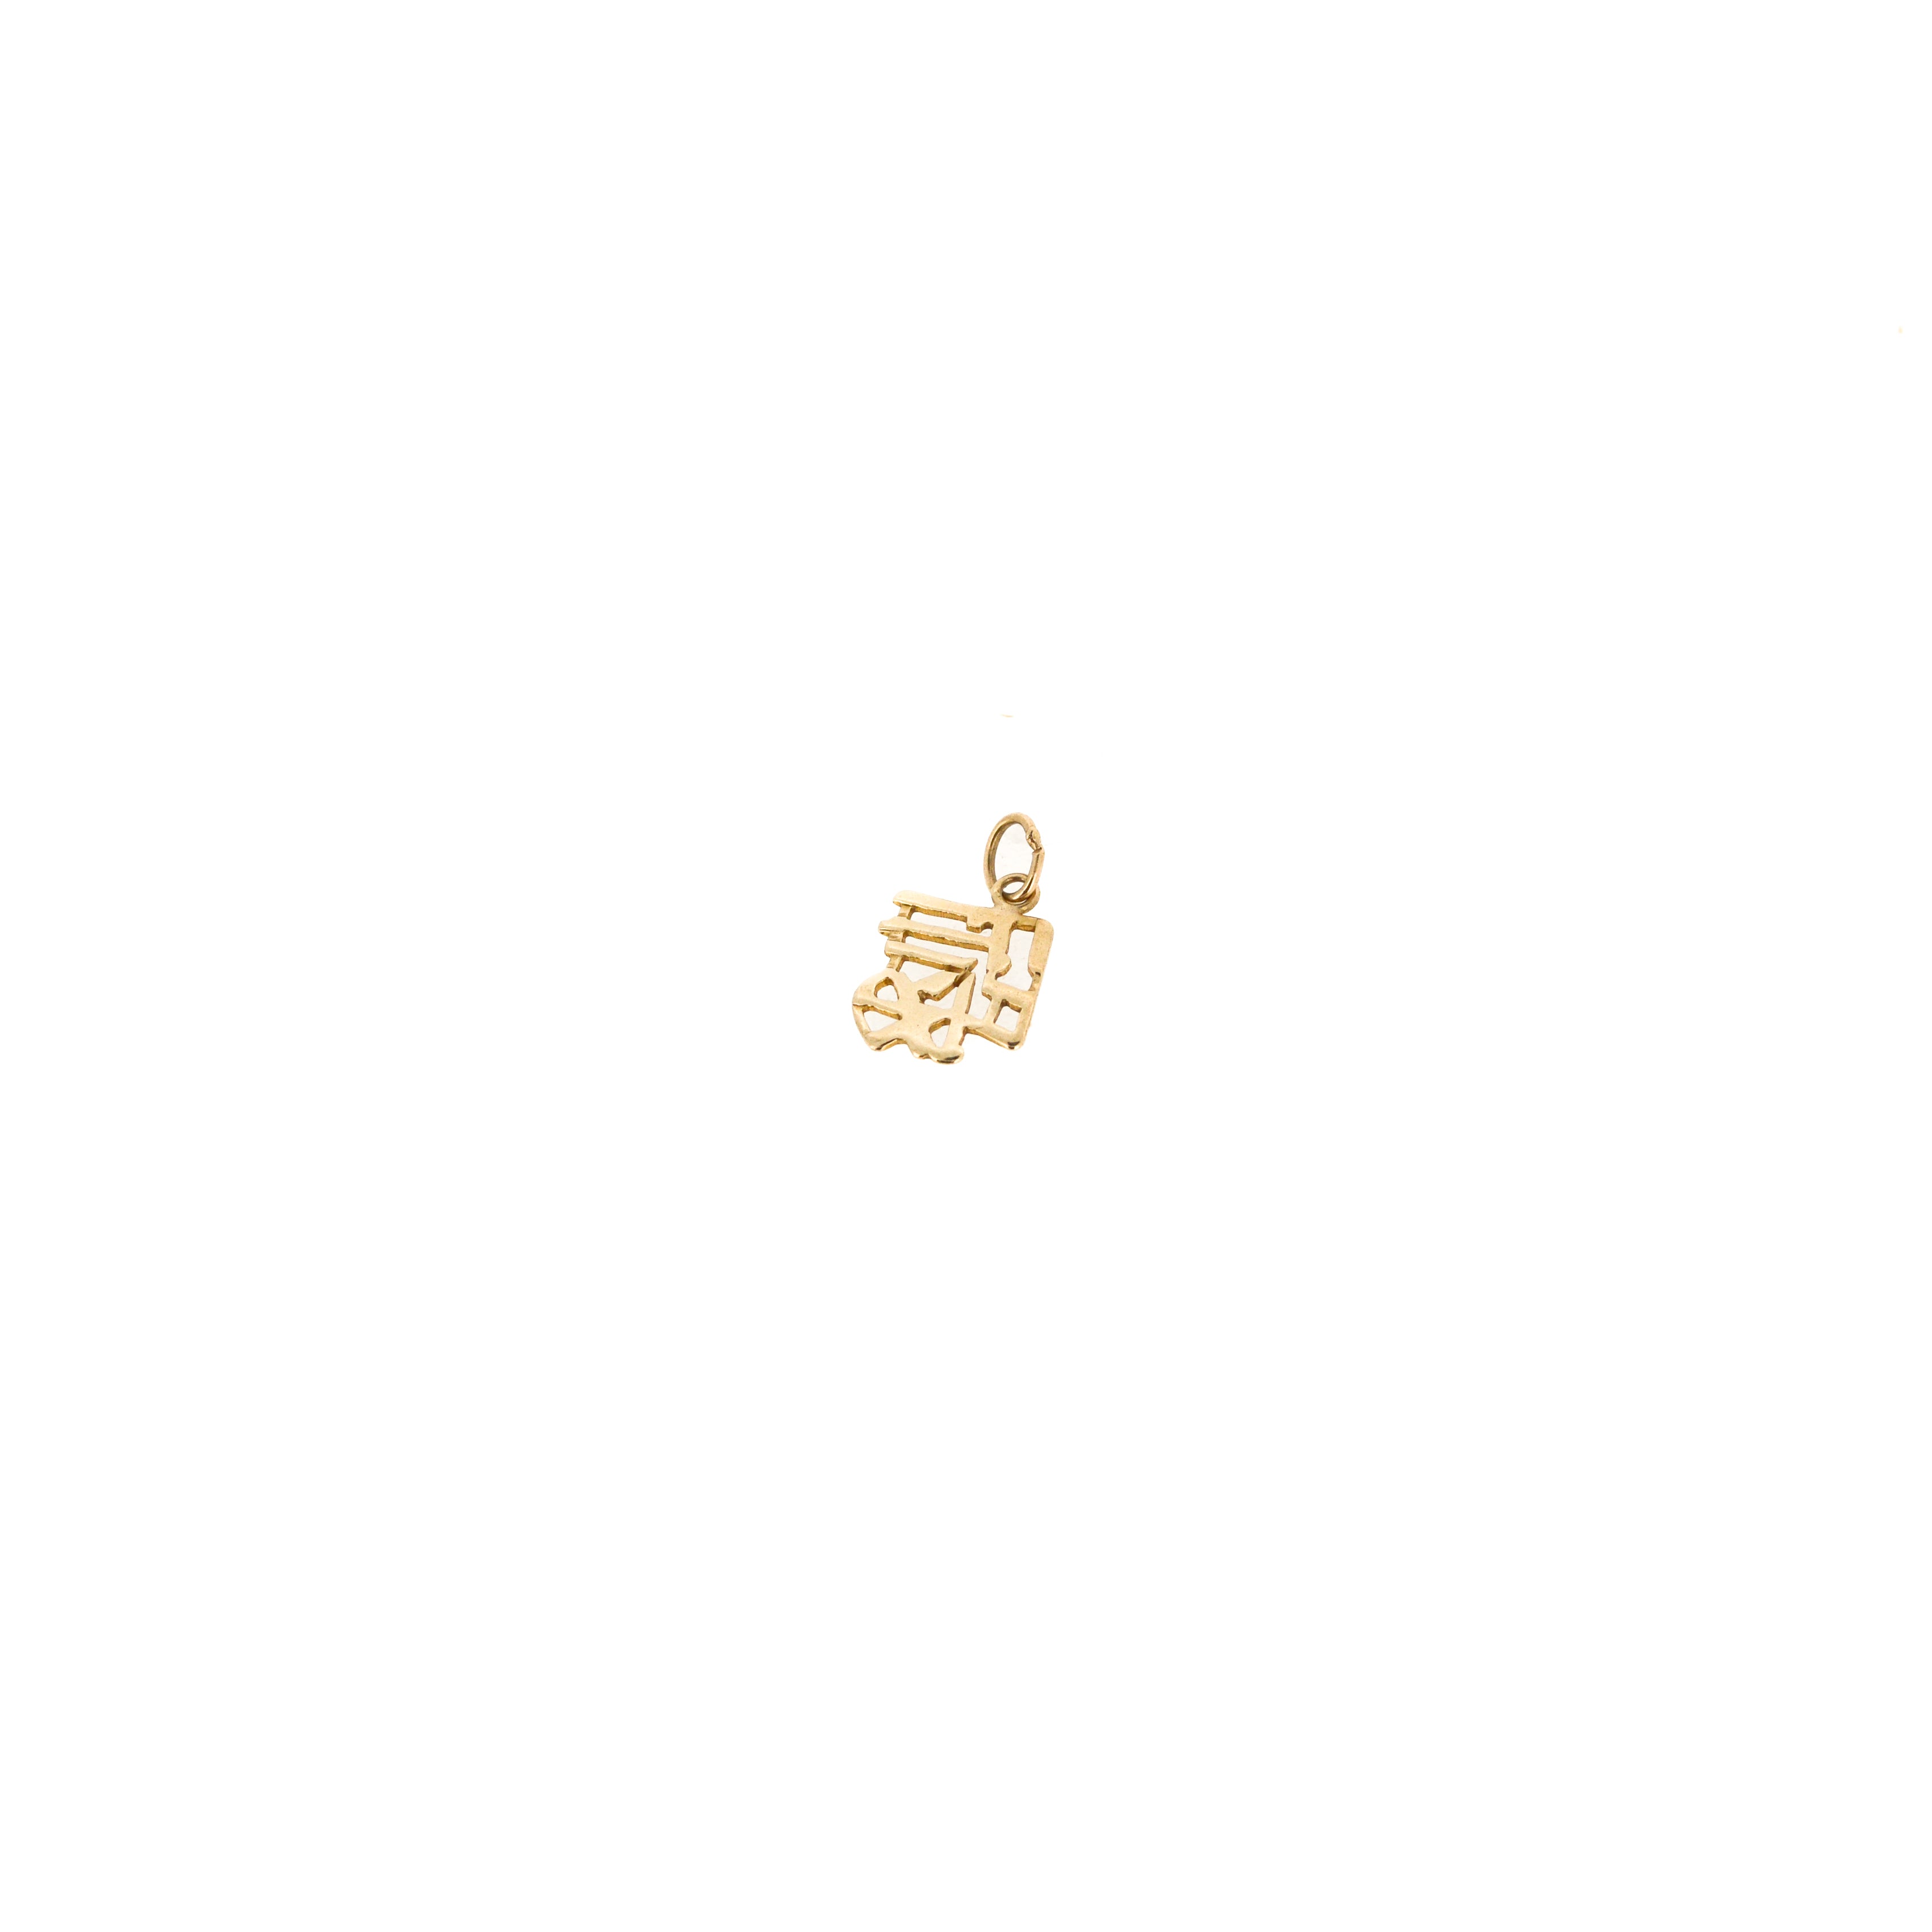 9ct Gold Chinese Symbol 'Good Fortune'